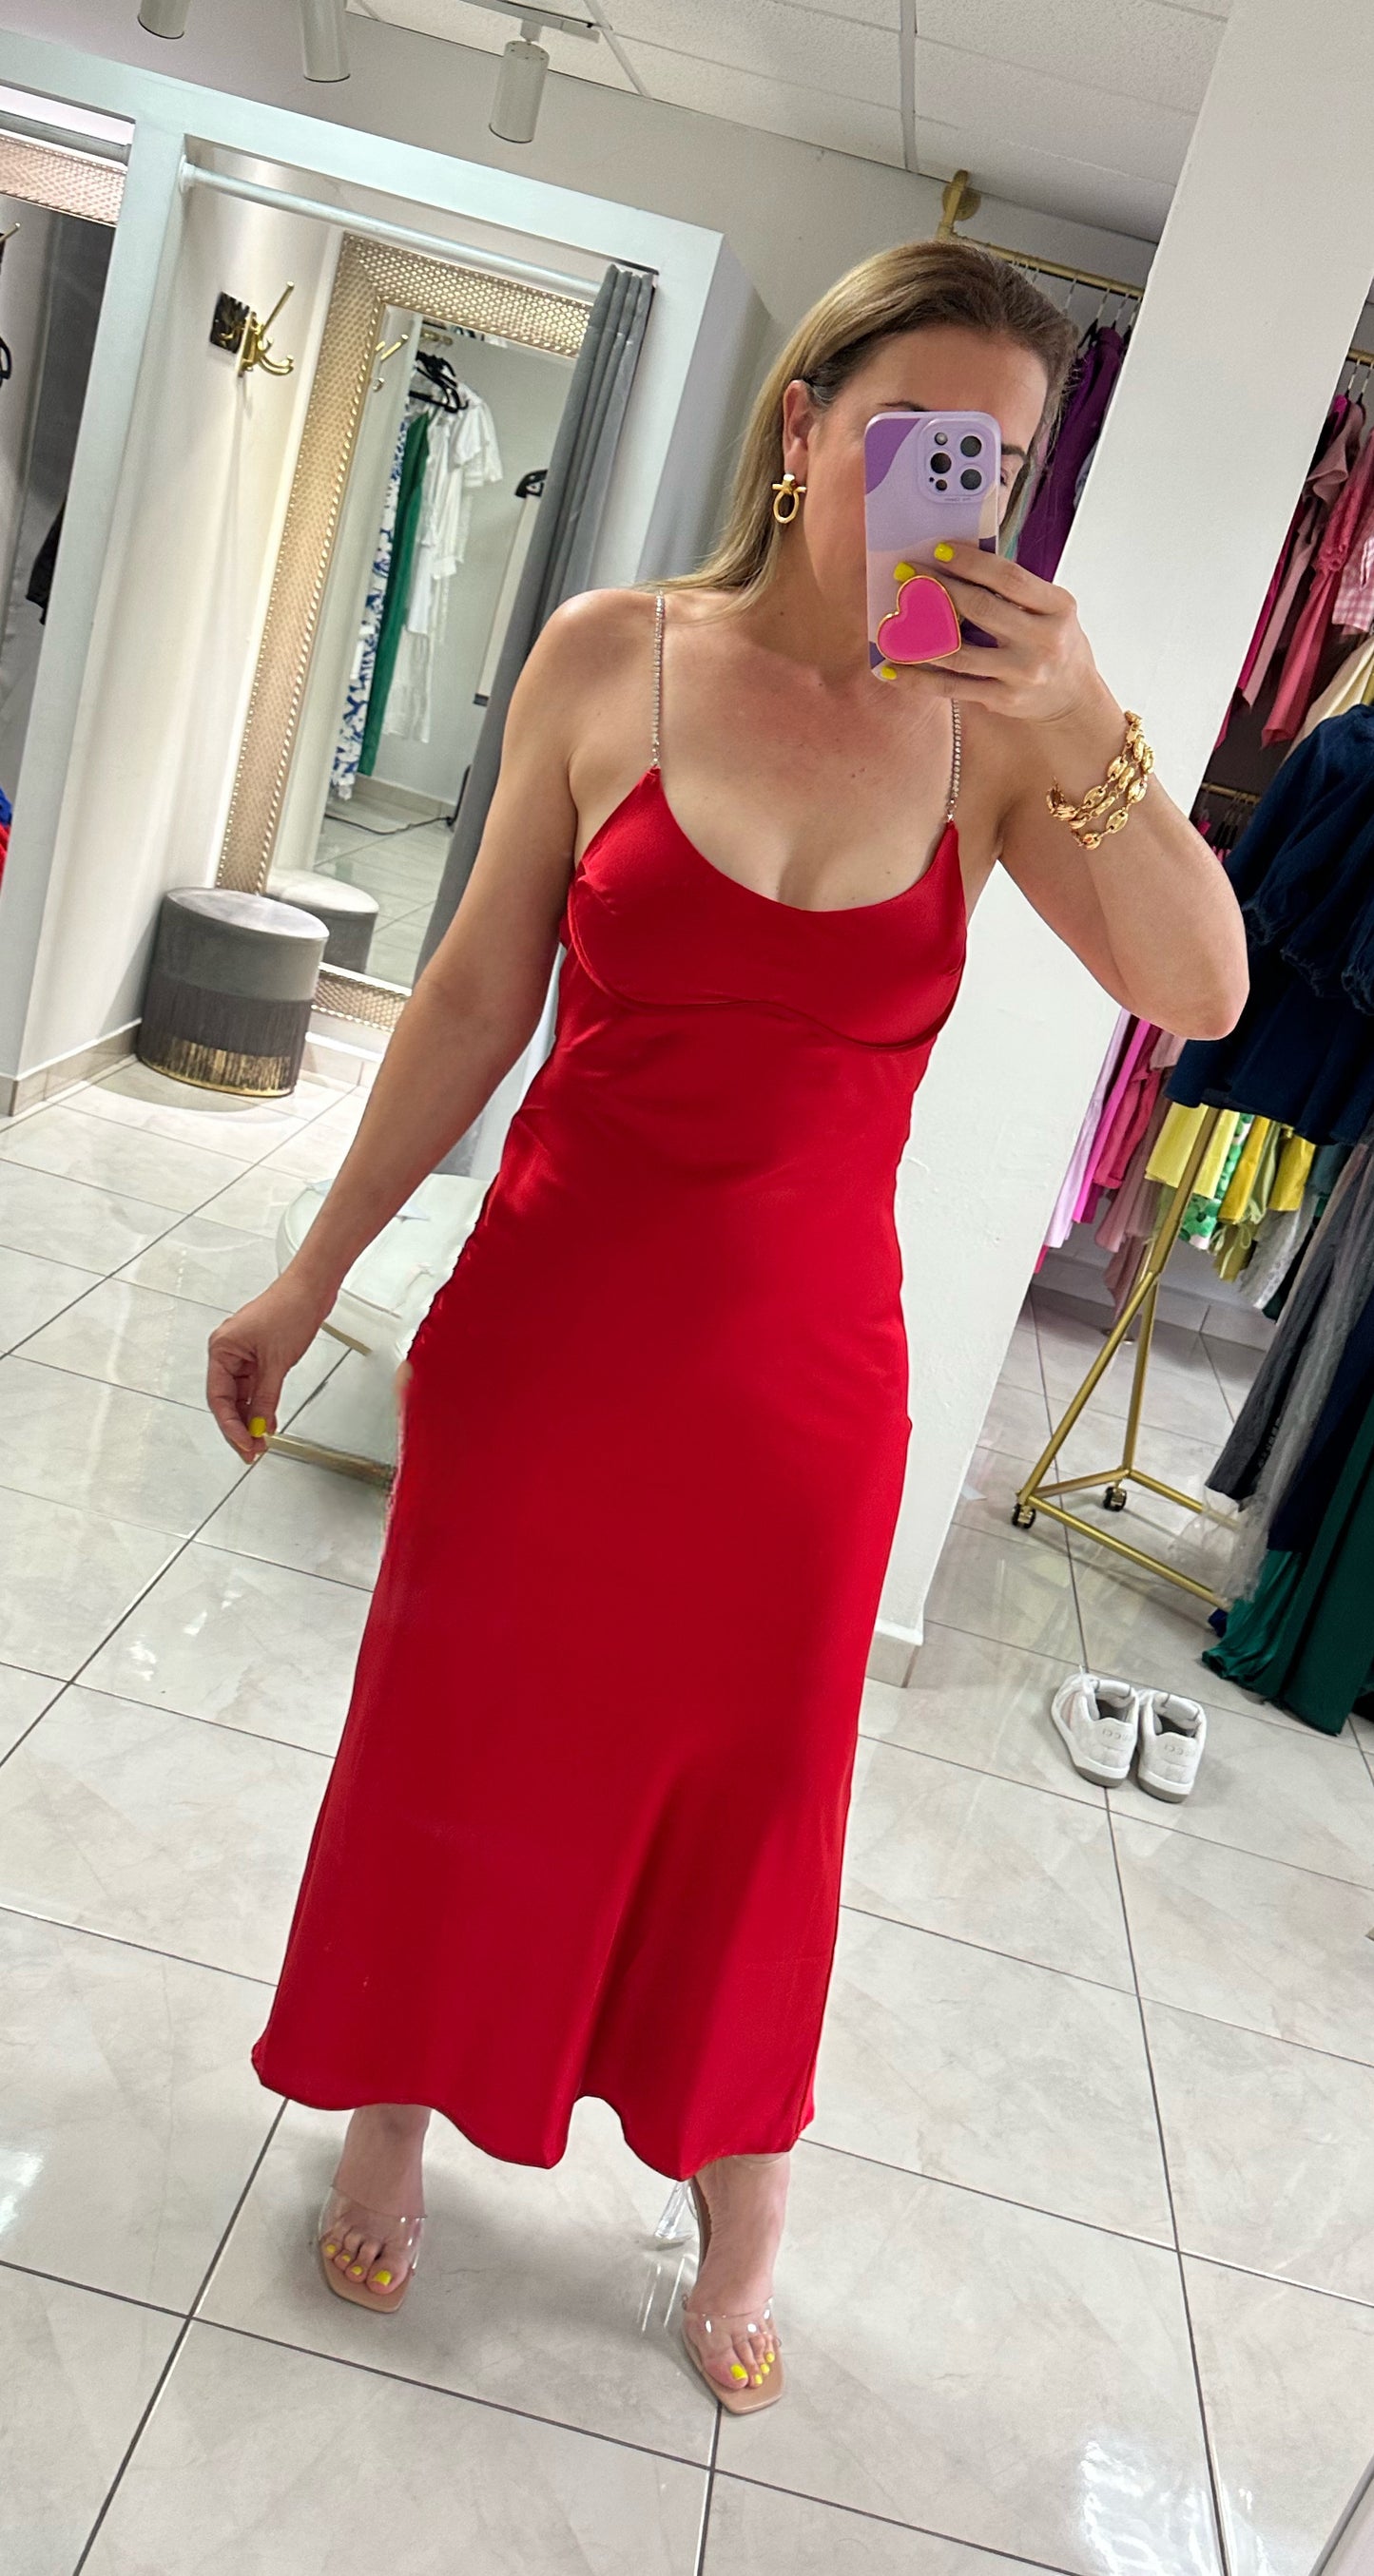 Sexy in red dress